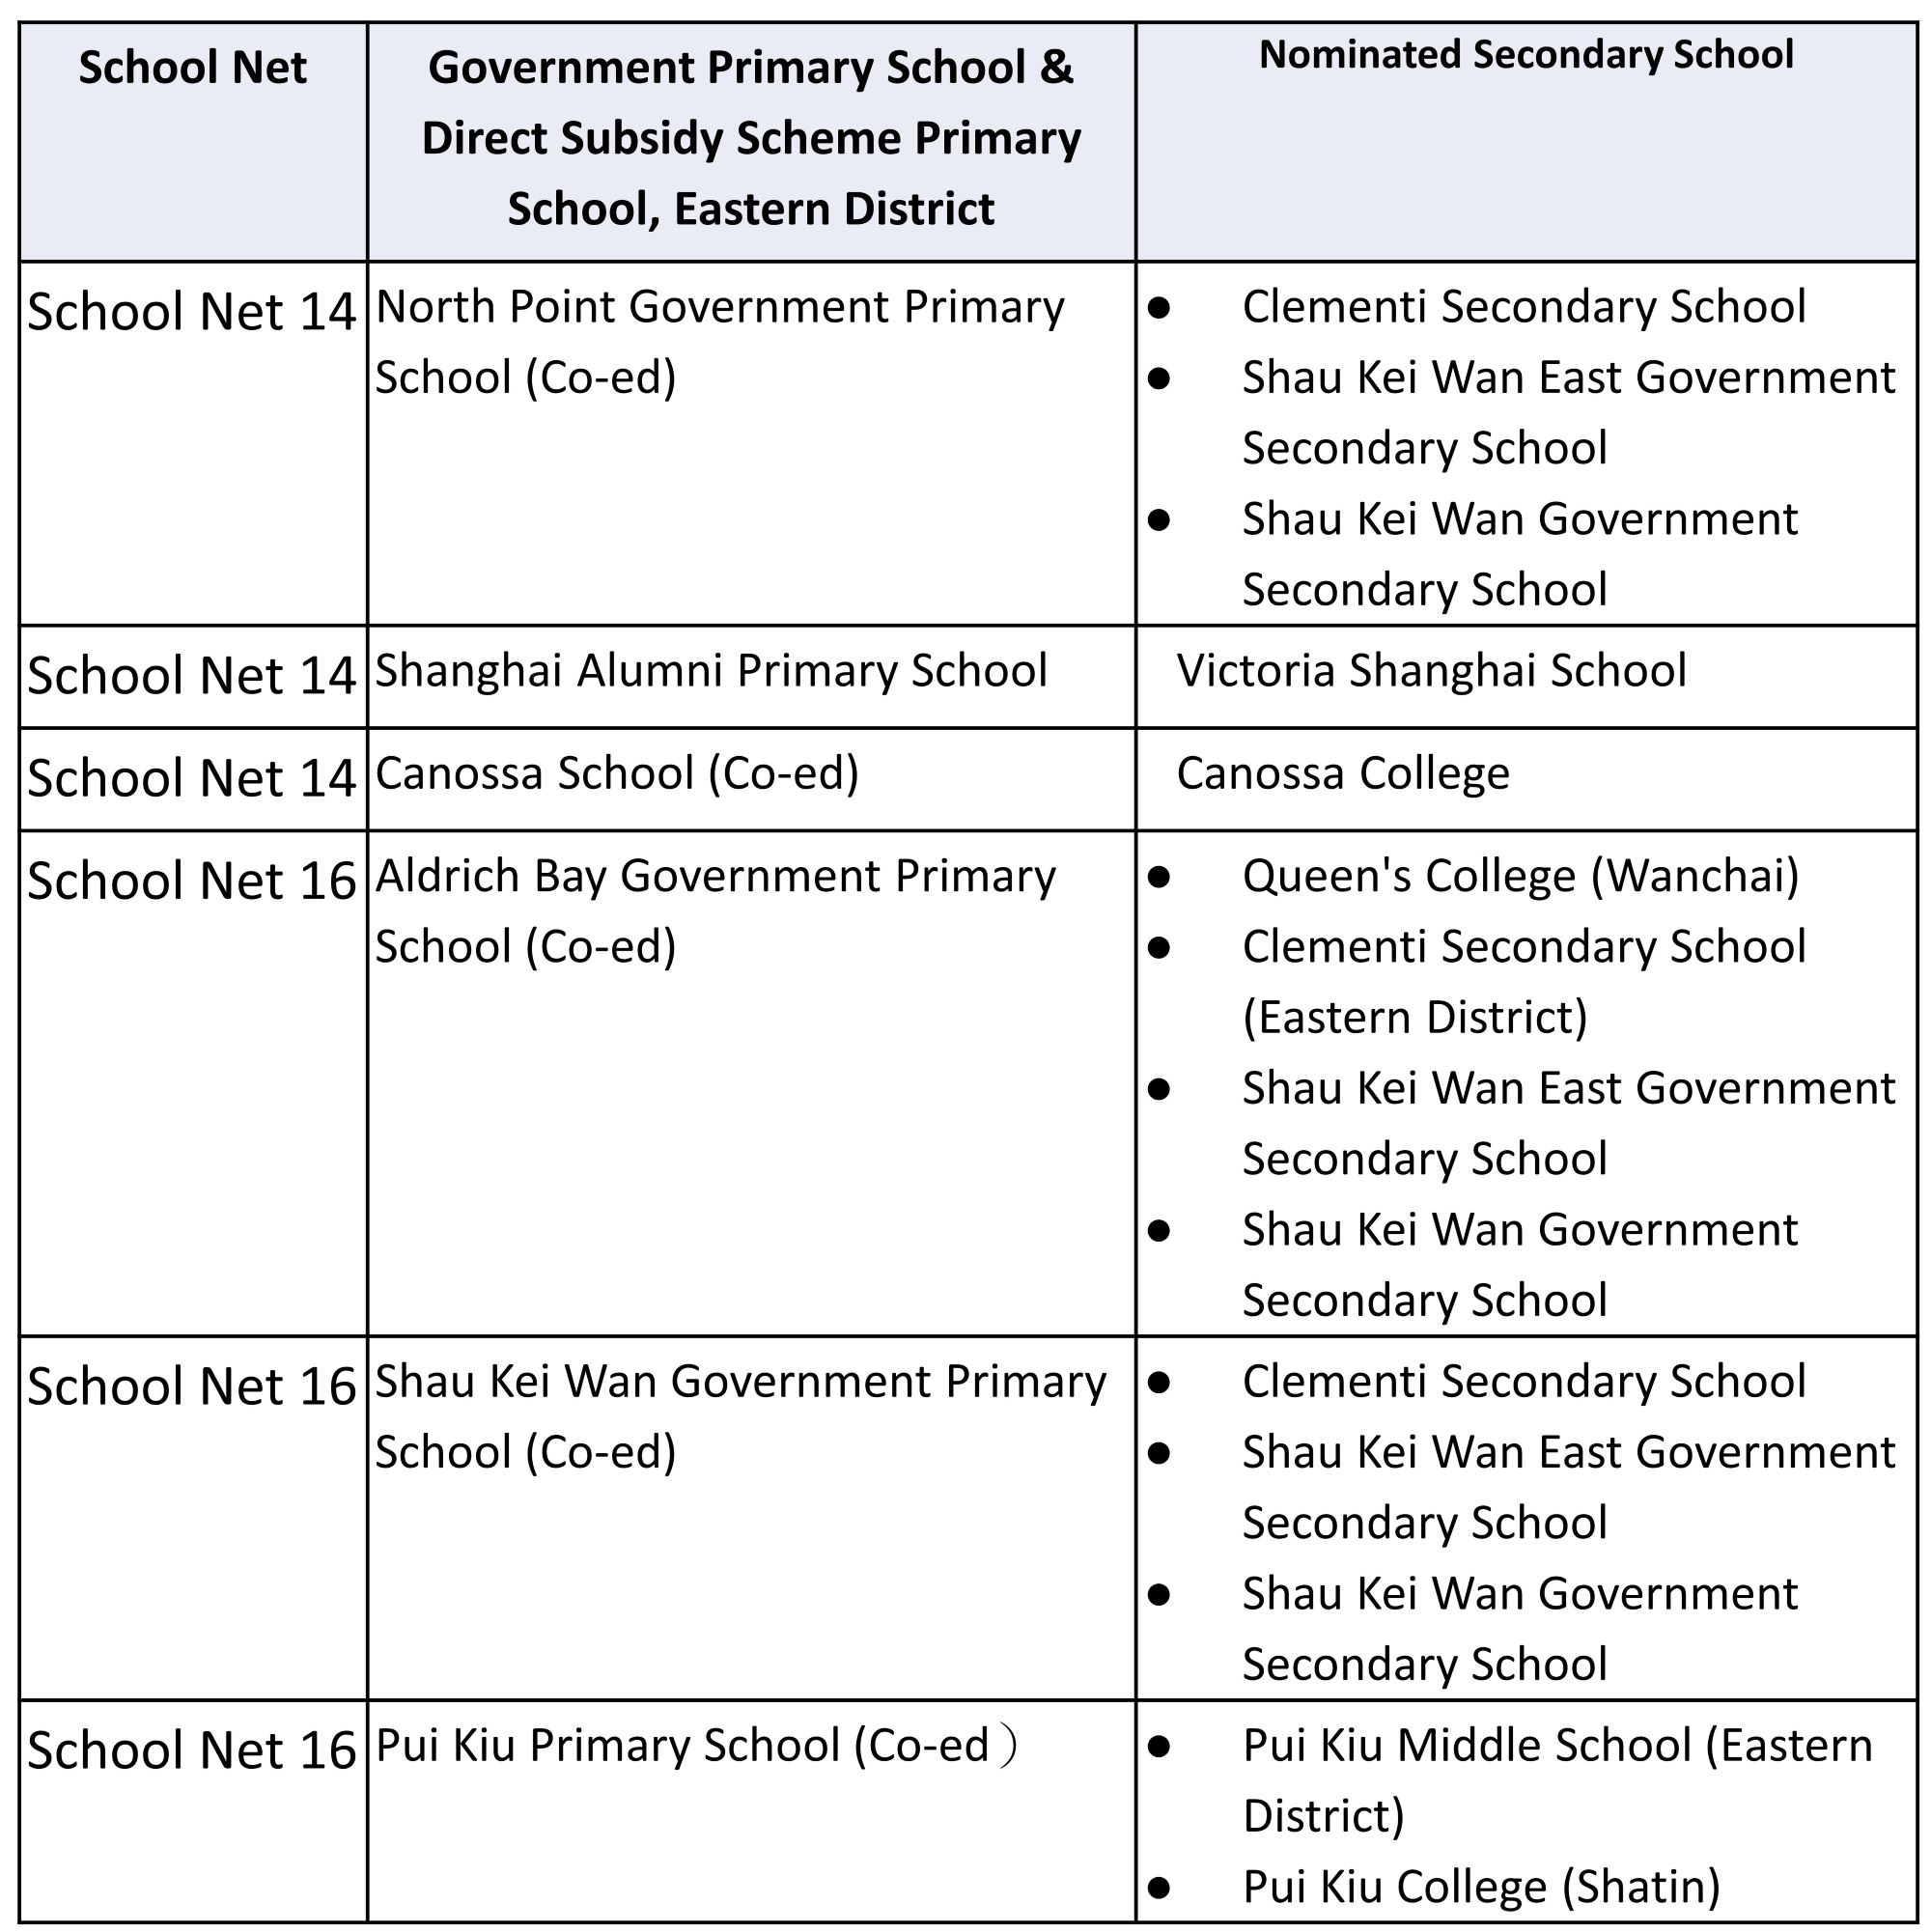 School Net 14 & 16: Eastern District School List and Property Recommendations